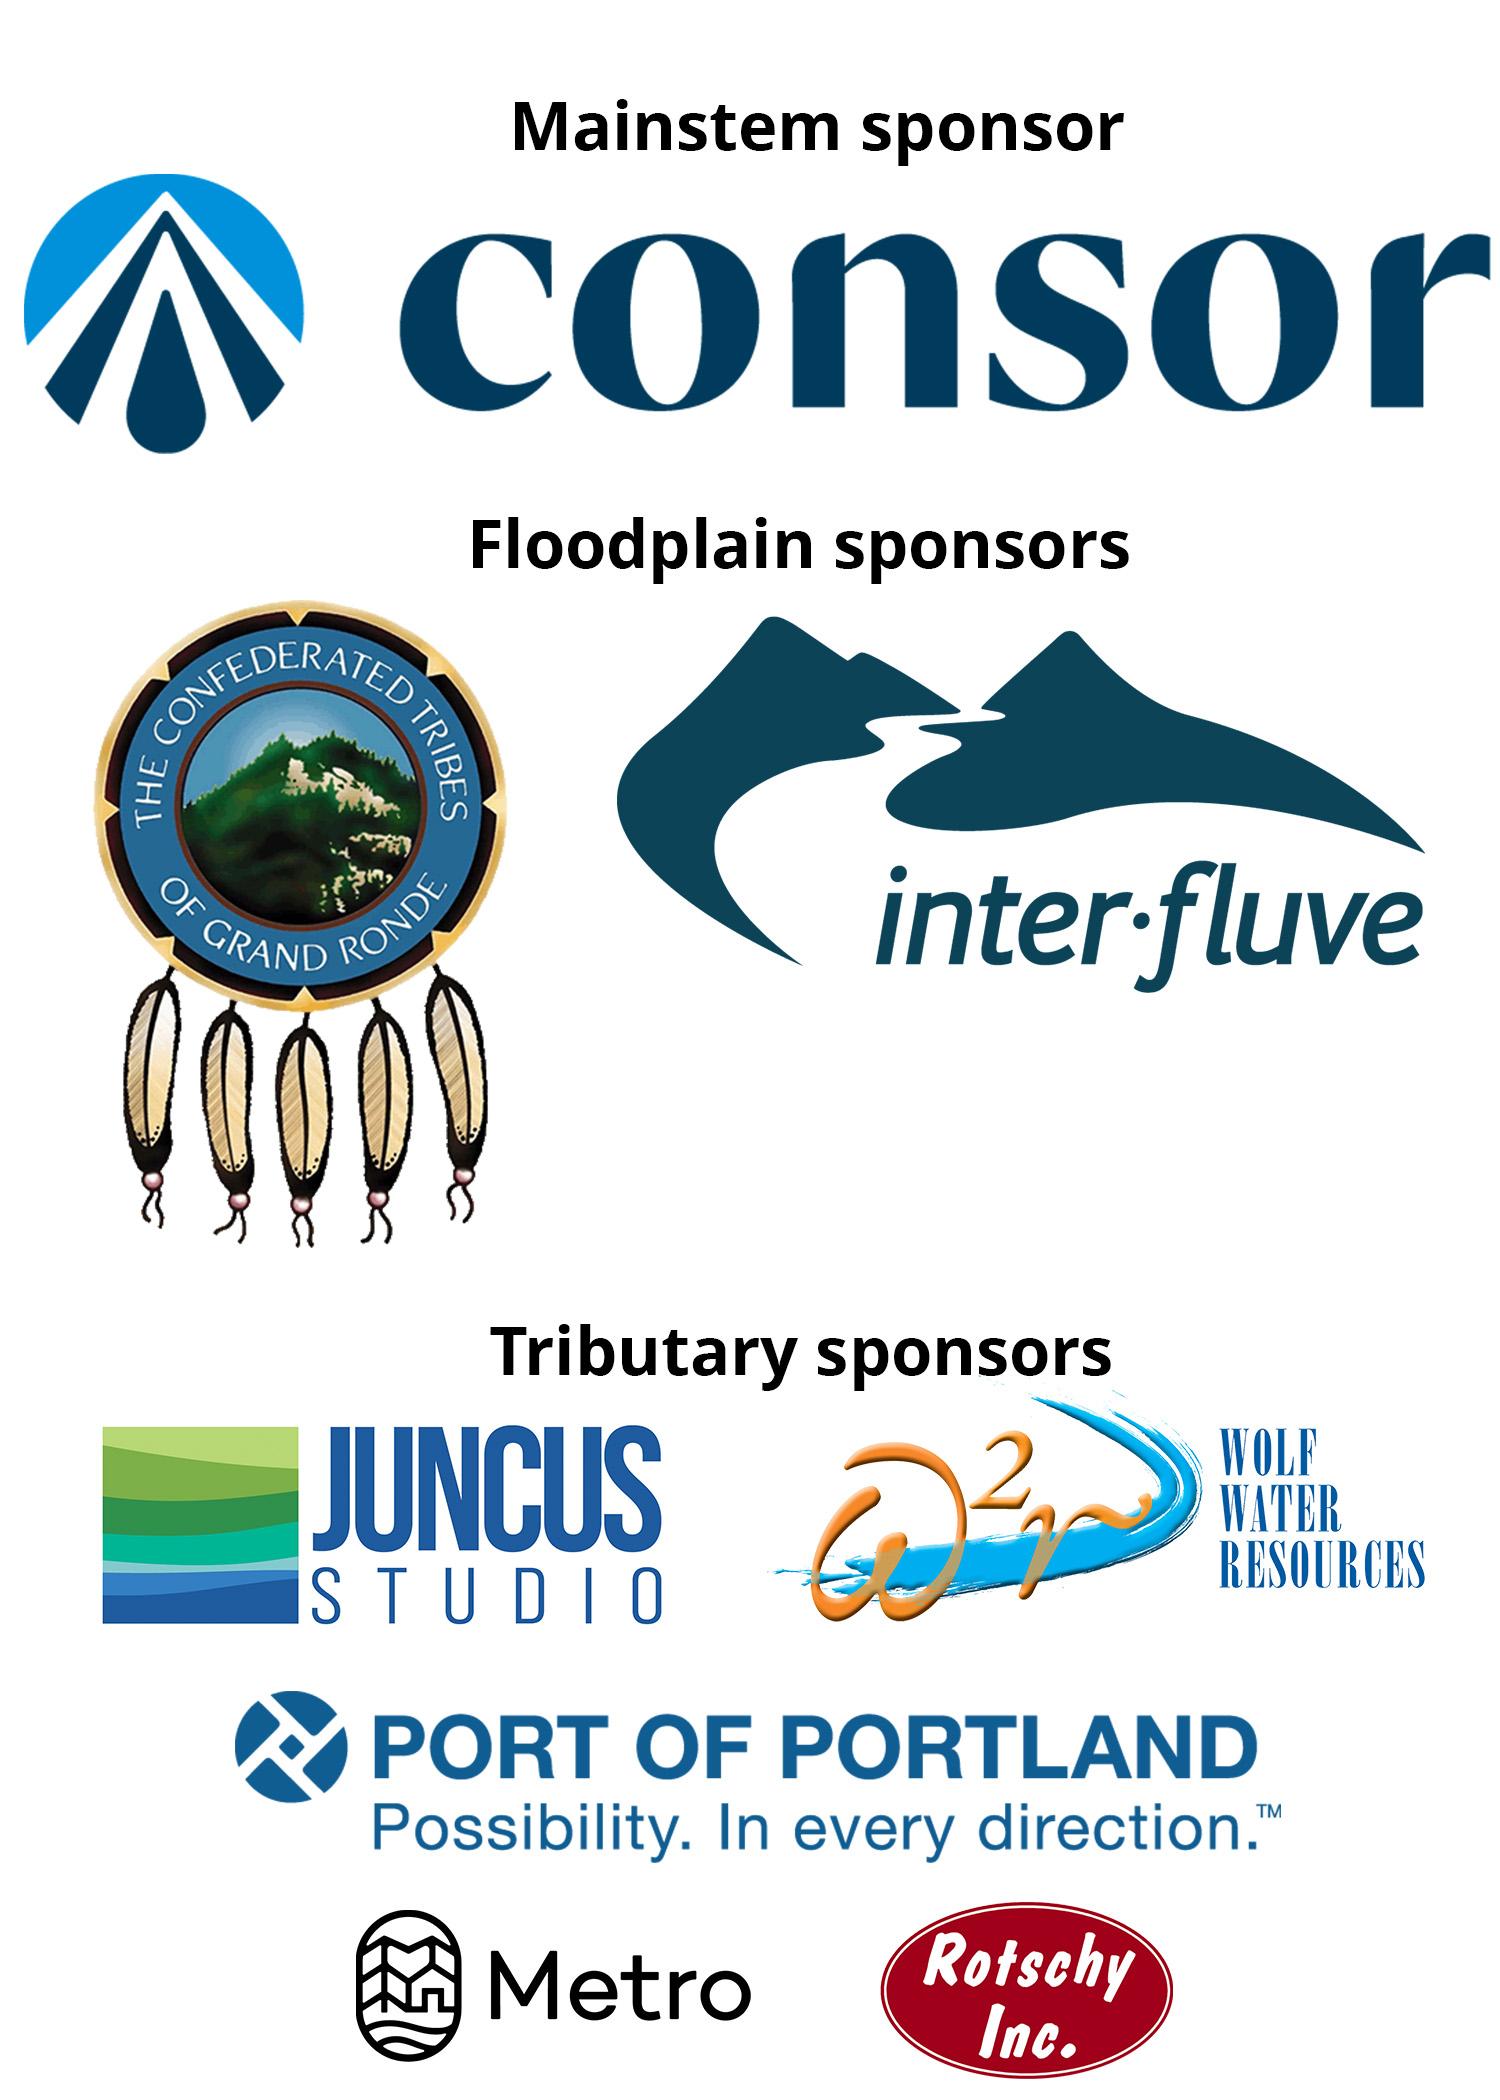 Logos for Consor Engineers, Confedered Tribes of Grand Ronde, Inter-Fluve, Juncus Studio, Wolf Water Resources, Port of Portland, Rotschy, and Metro